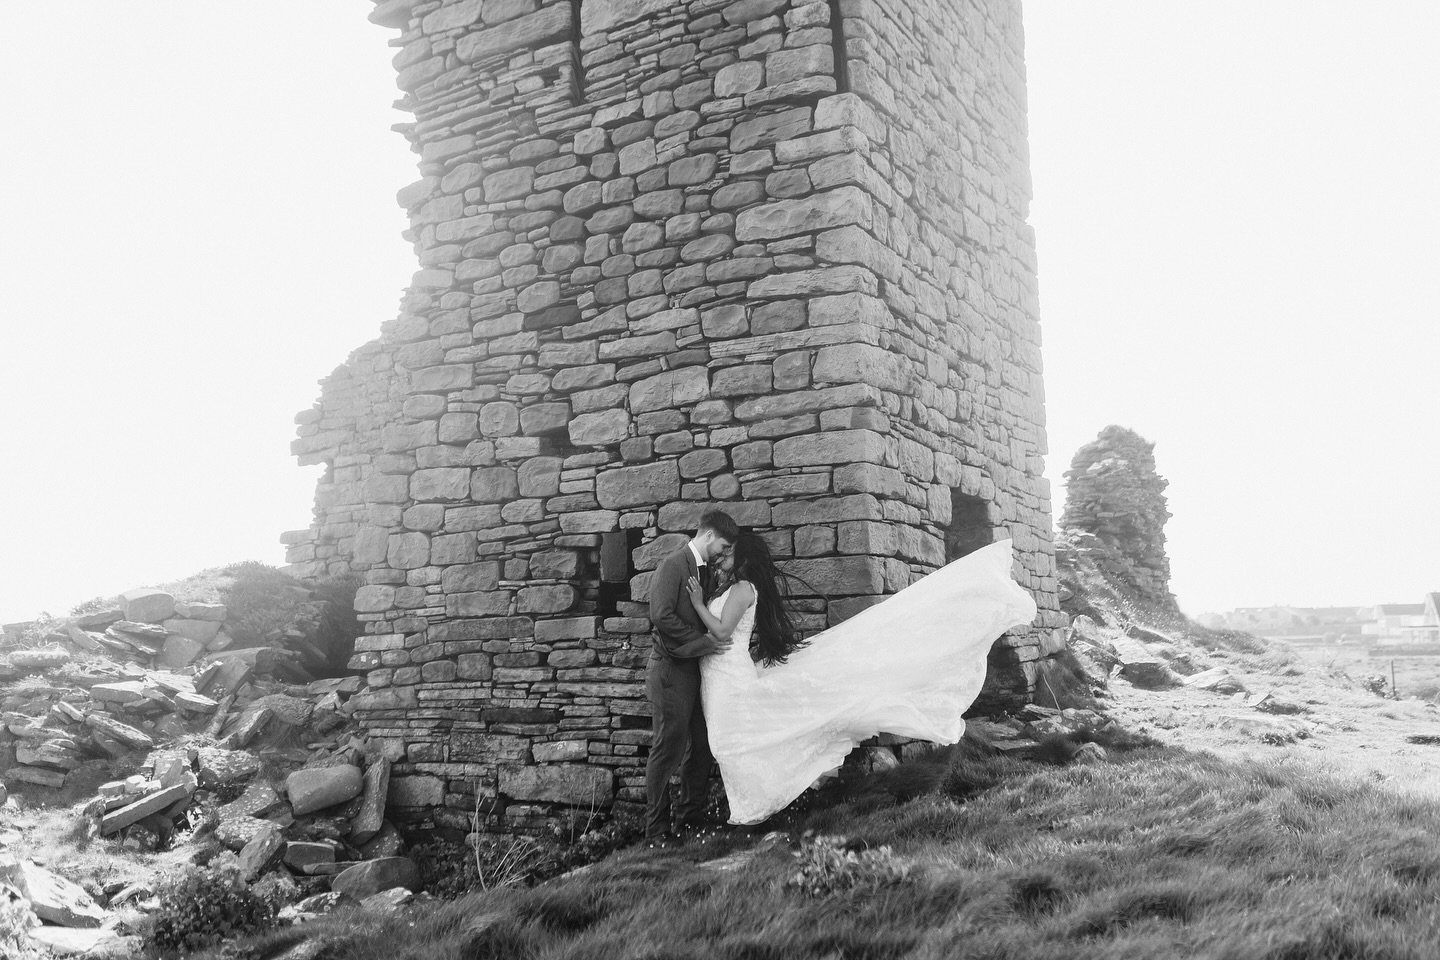 When the wind is traveling at 65 mph, you don&rsquo;t need a second shooter or bridesmaid to throw the dress and run. 😂 

#weddingphotographer #ireland #destinationwedding